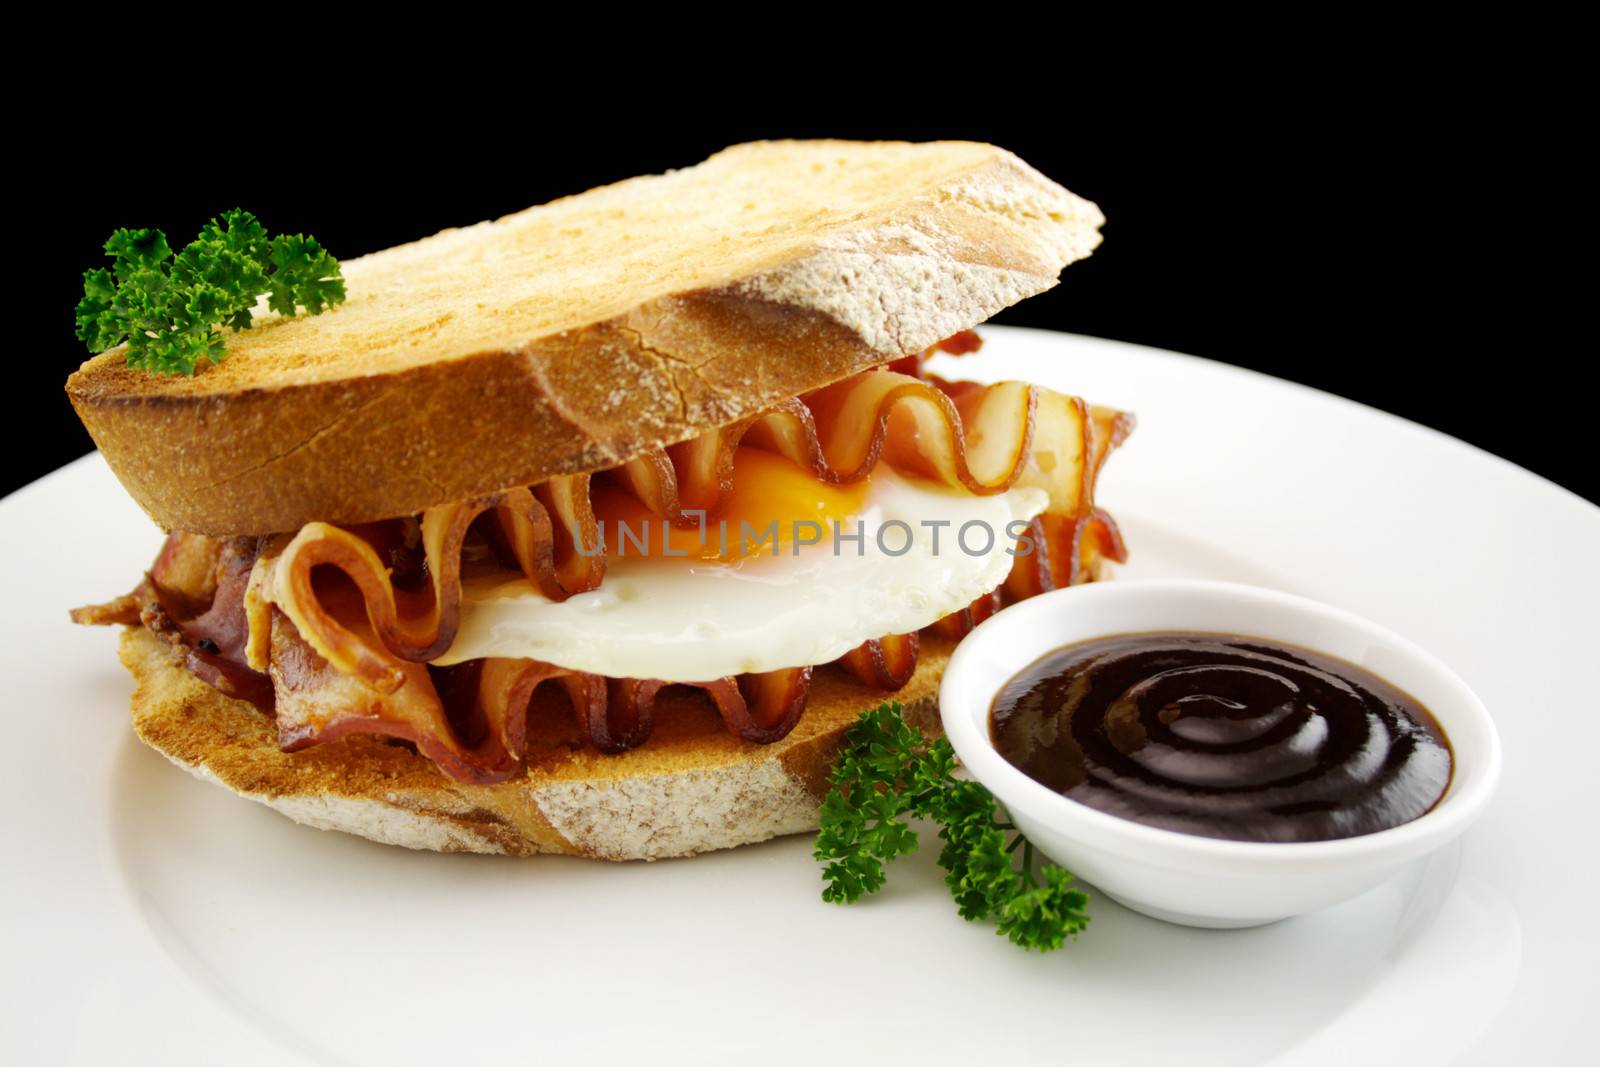 Curled bacon and egg sandwich with BBQ sauce ready to serve.